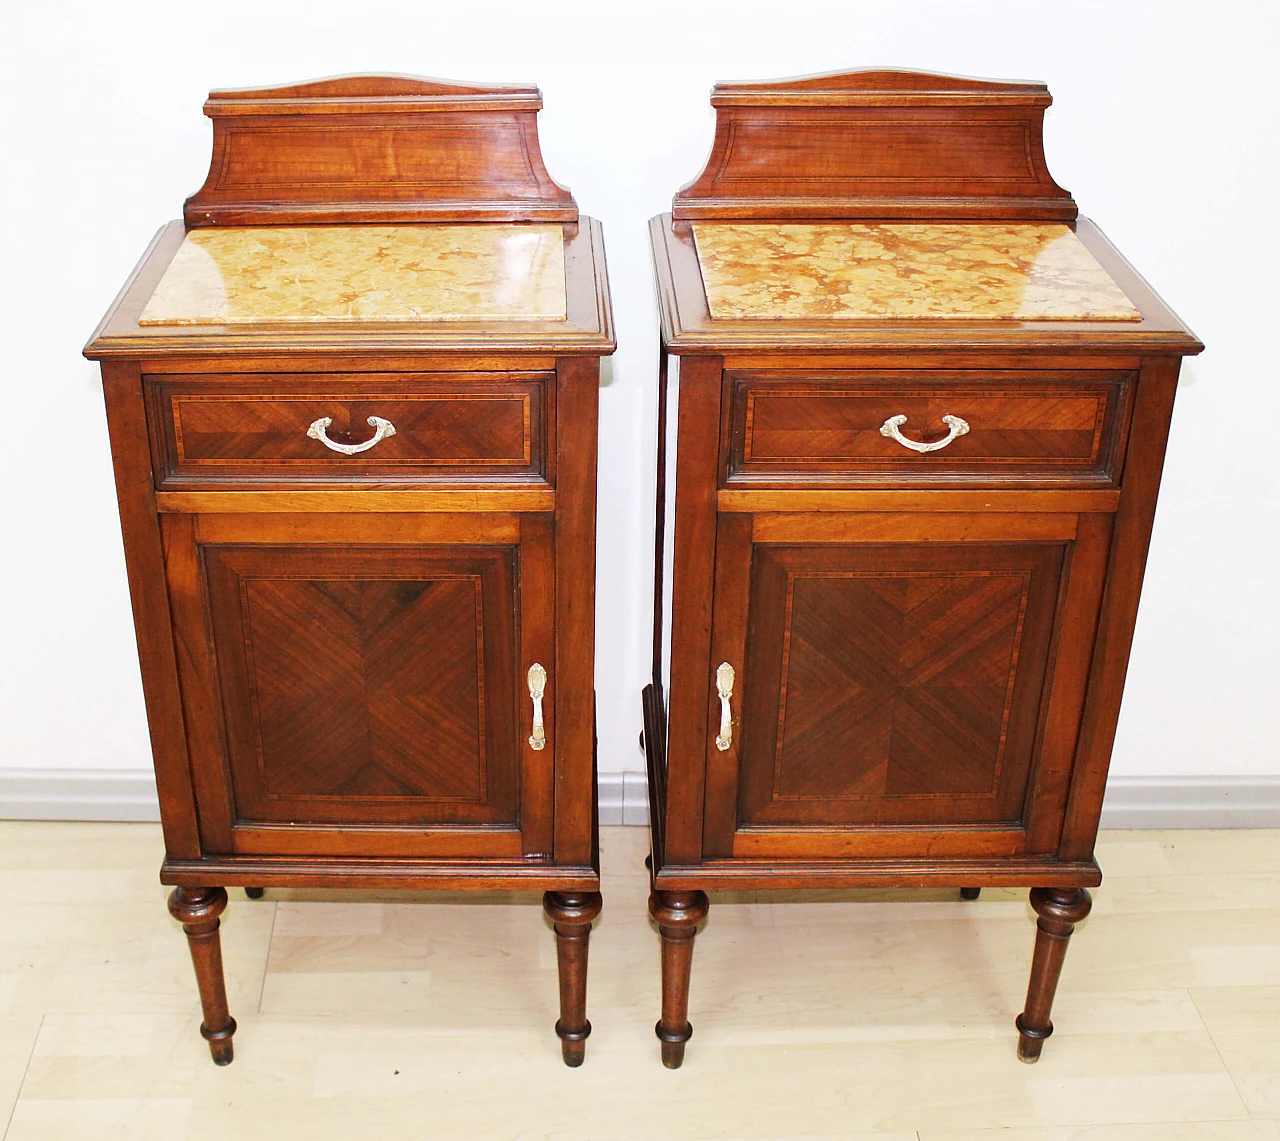 Pair of solid walnut bedside tables with inlays and pink marble top, 1920s 1